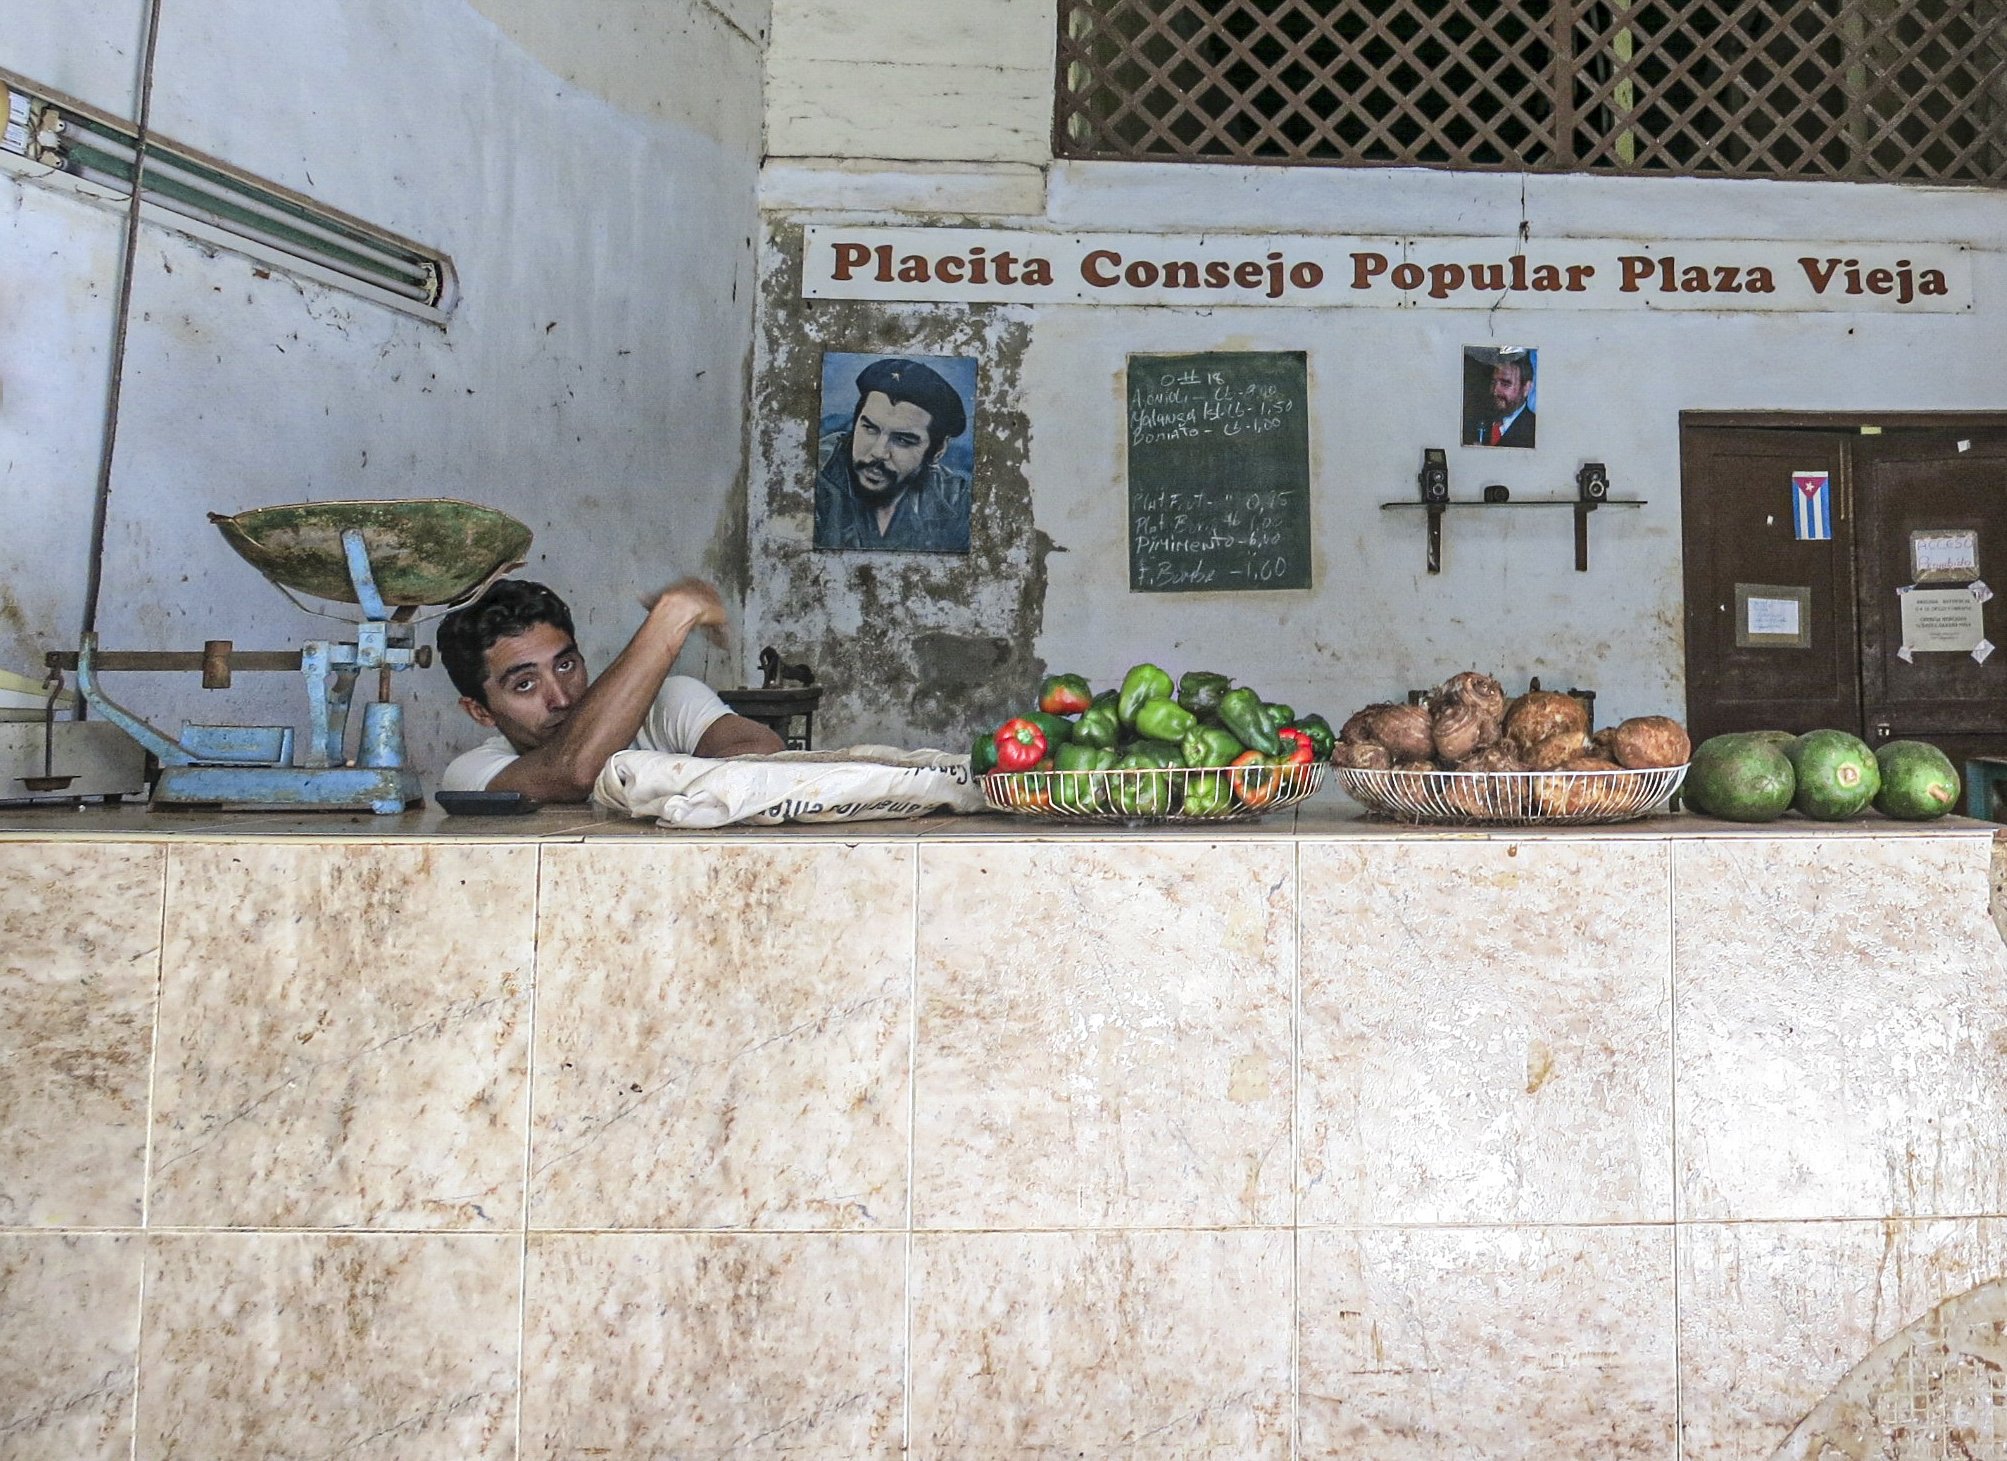 LA HABANA VIEJA | Grocery store | All images this page © Phoebe Eaton 2024 | All rights reserved